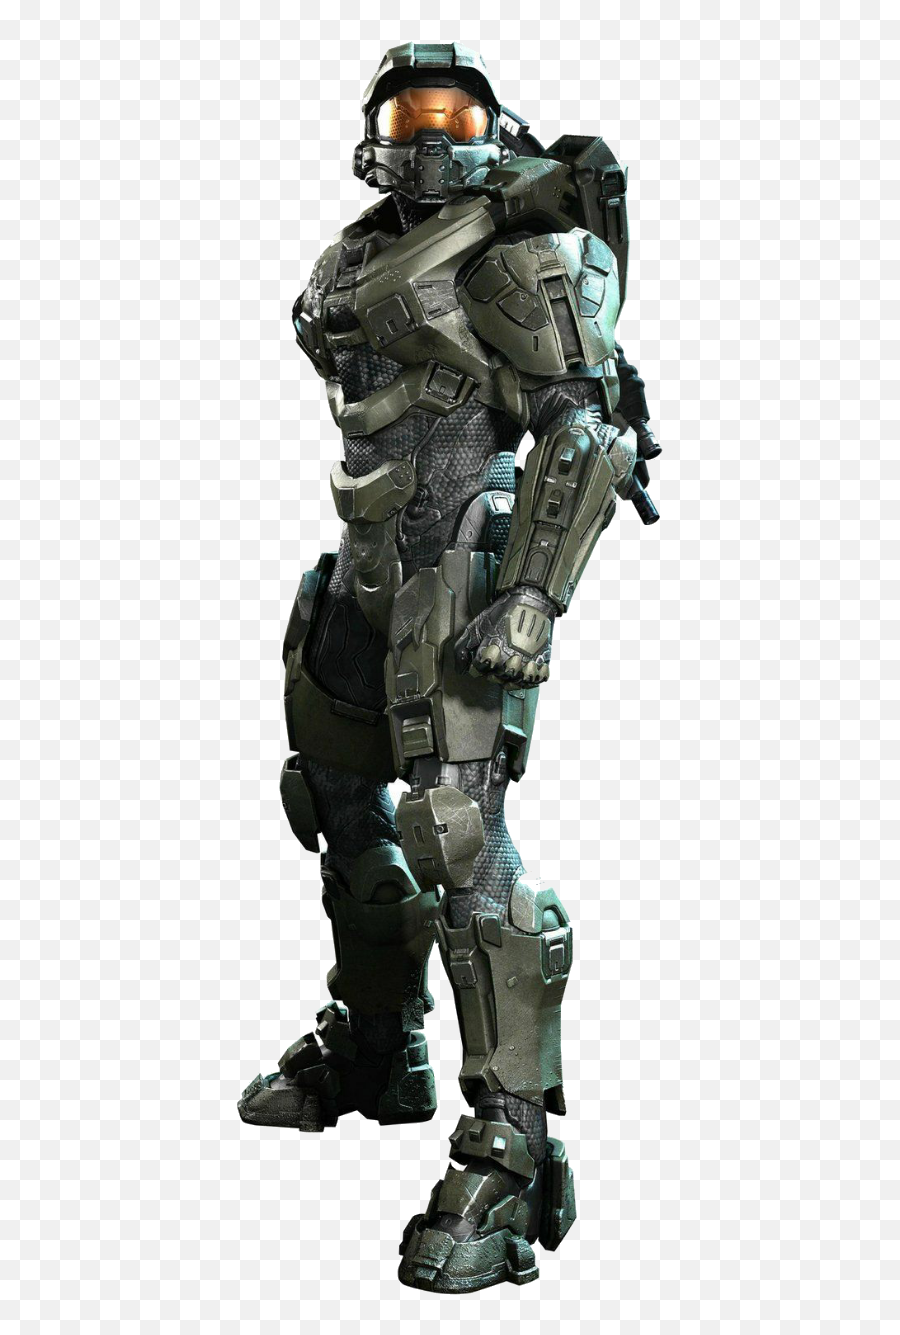 Master Chief Png Image - Transparent Halo Master Chief Emoji,Master Chief Emoji